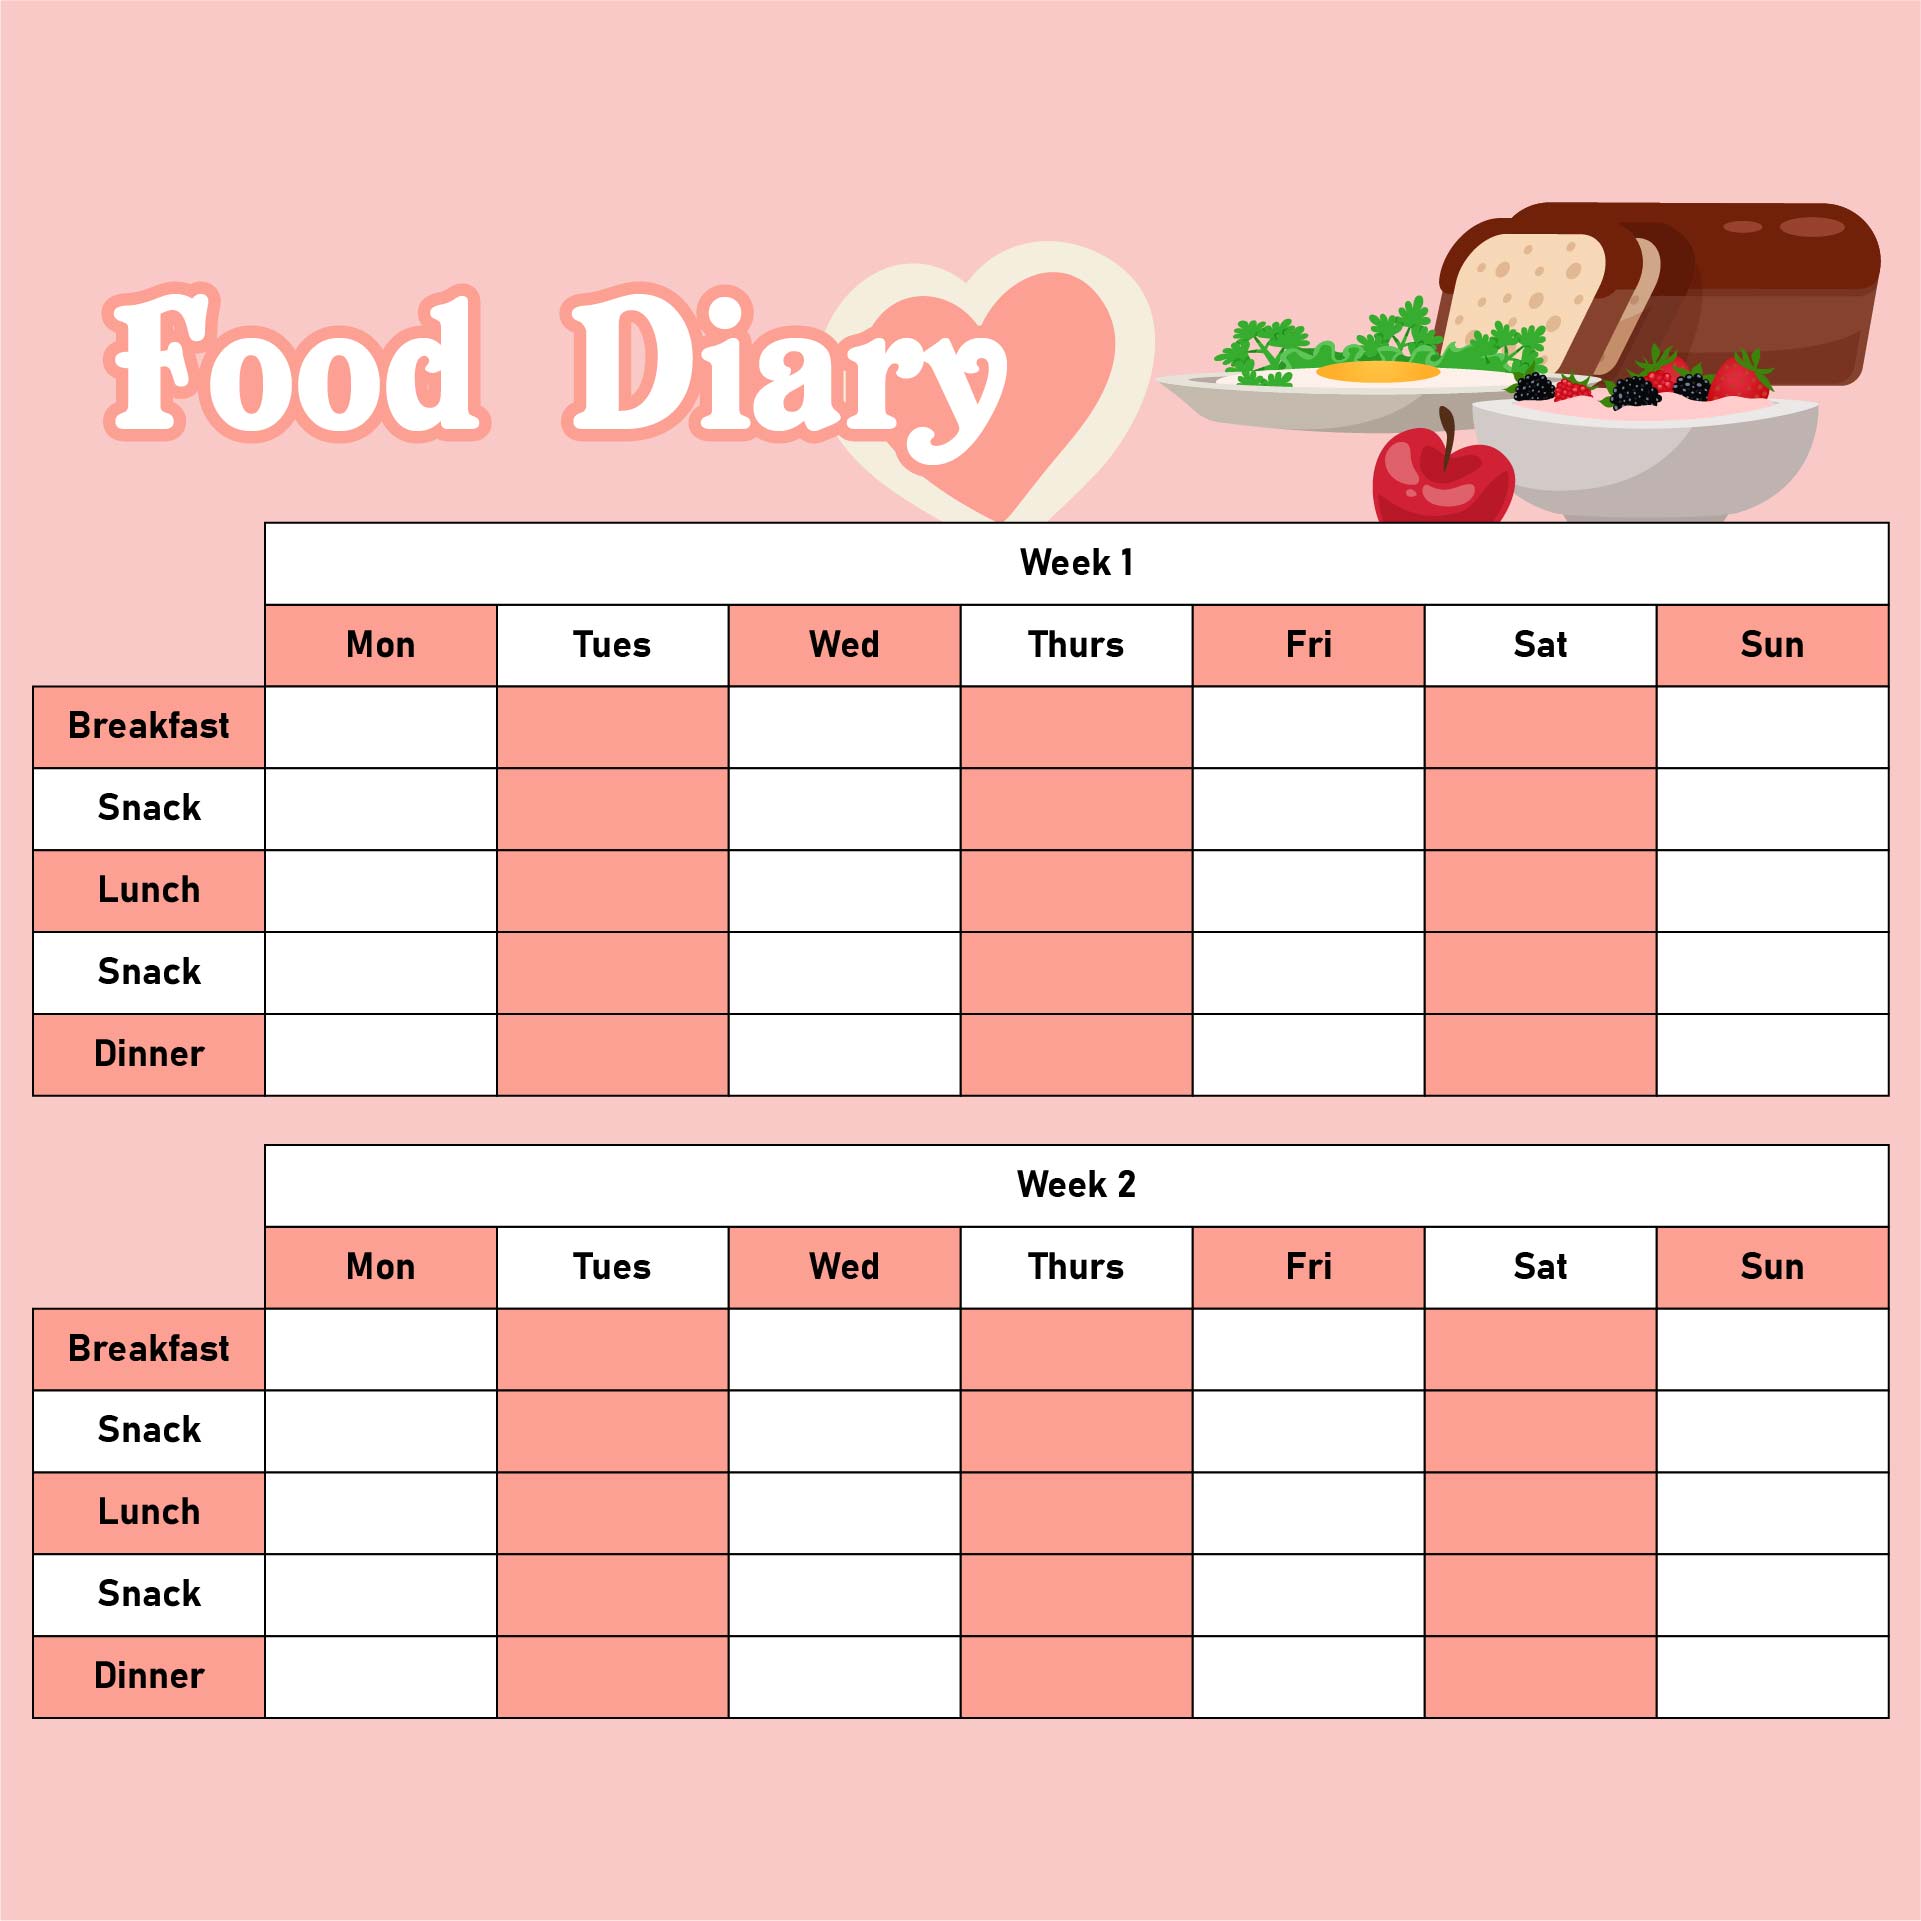 7-best-images-of-printable-7-day-food-log-5-meals-a-day-food-diary